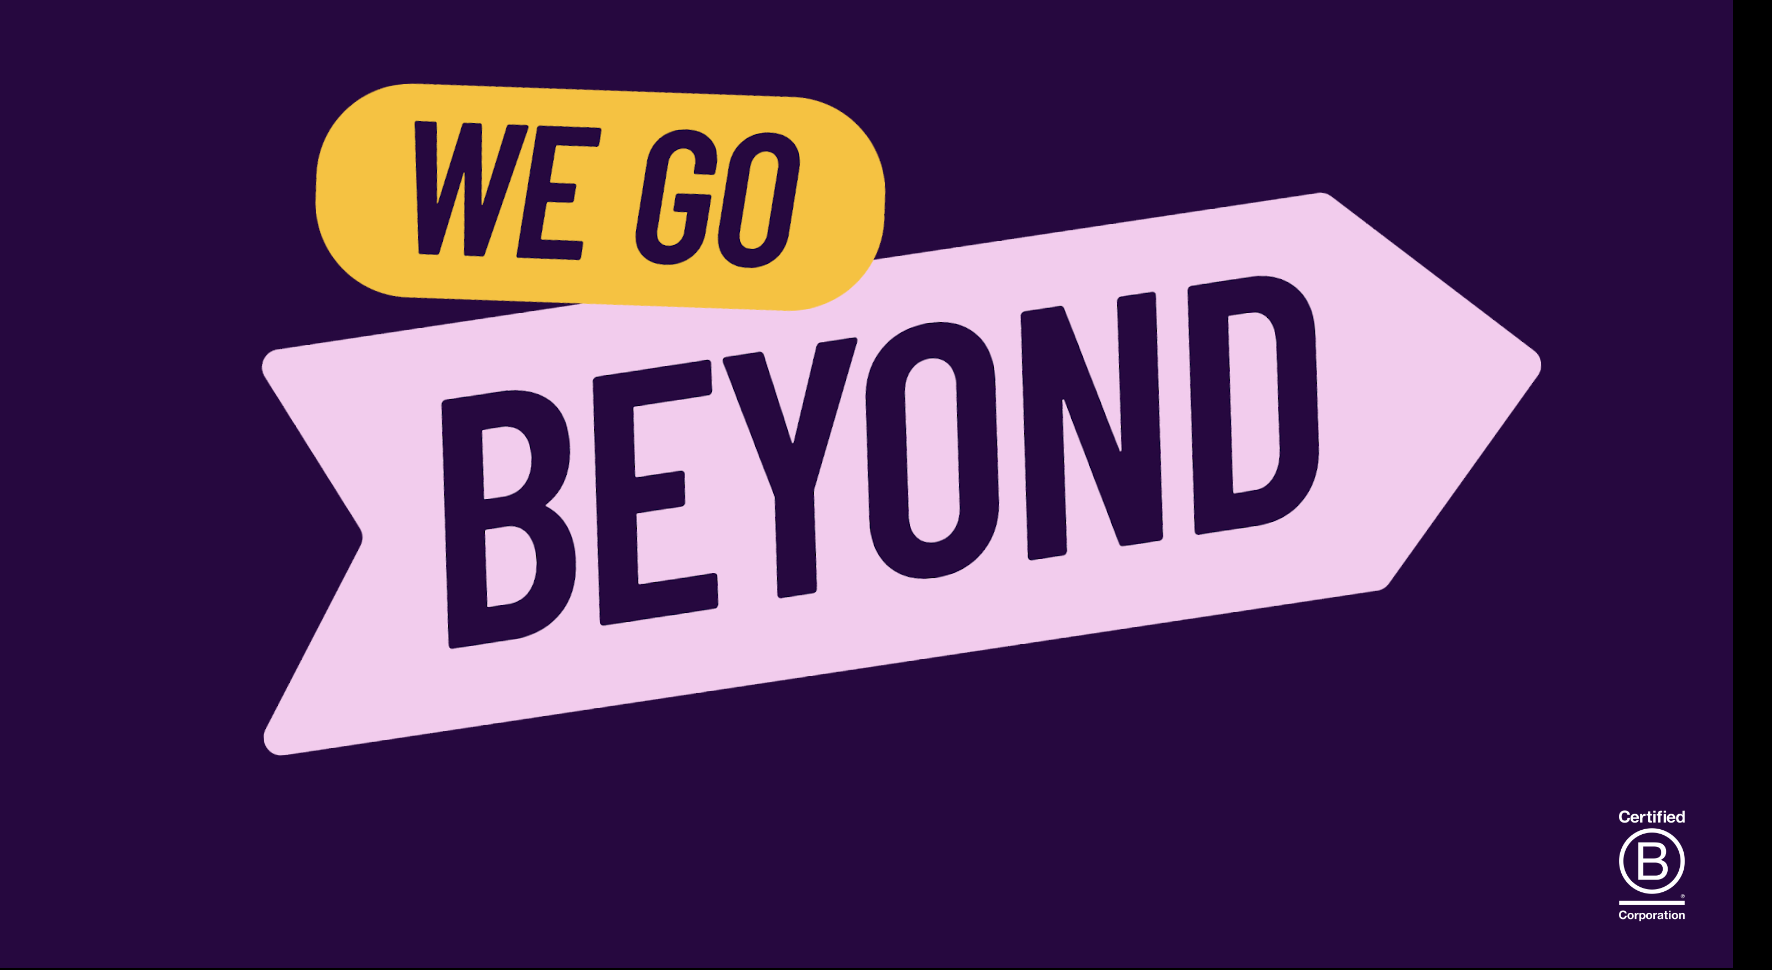 Going beyond: How DEPT® is using business as a force for good